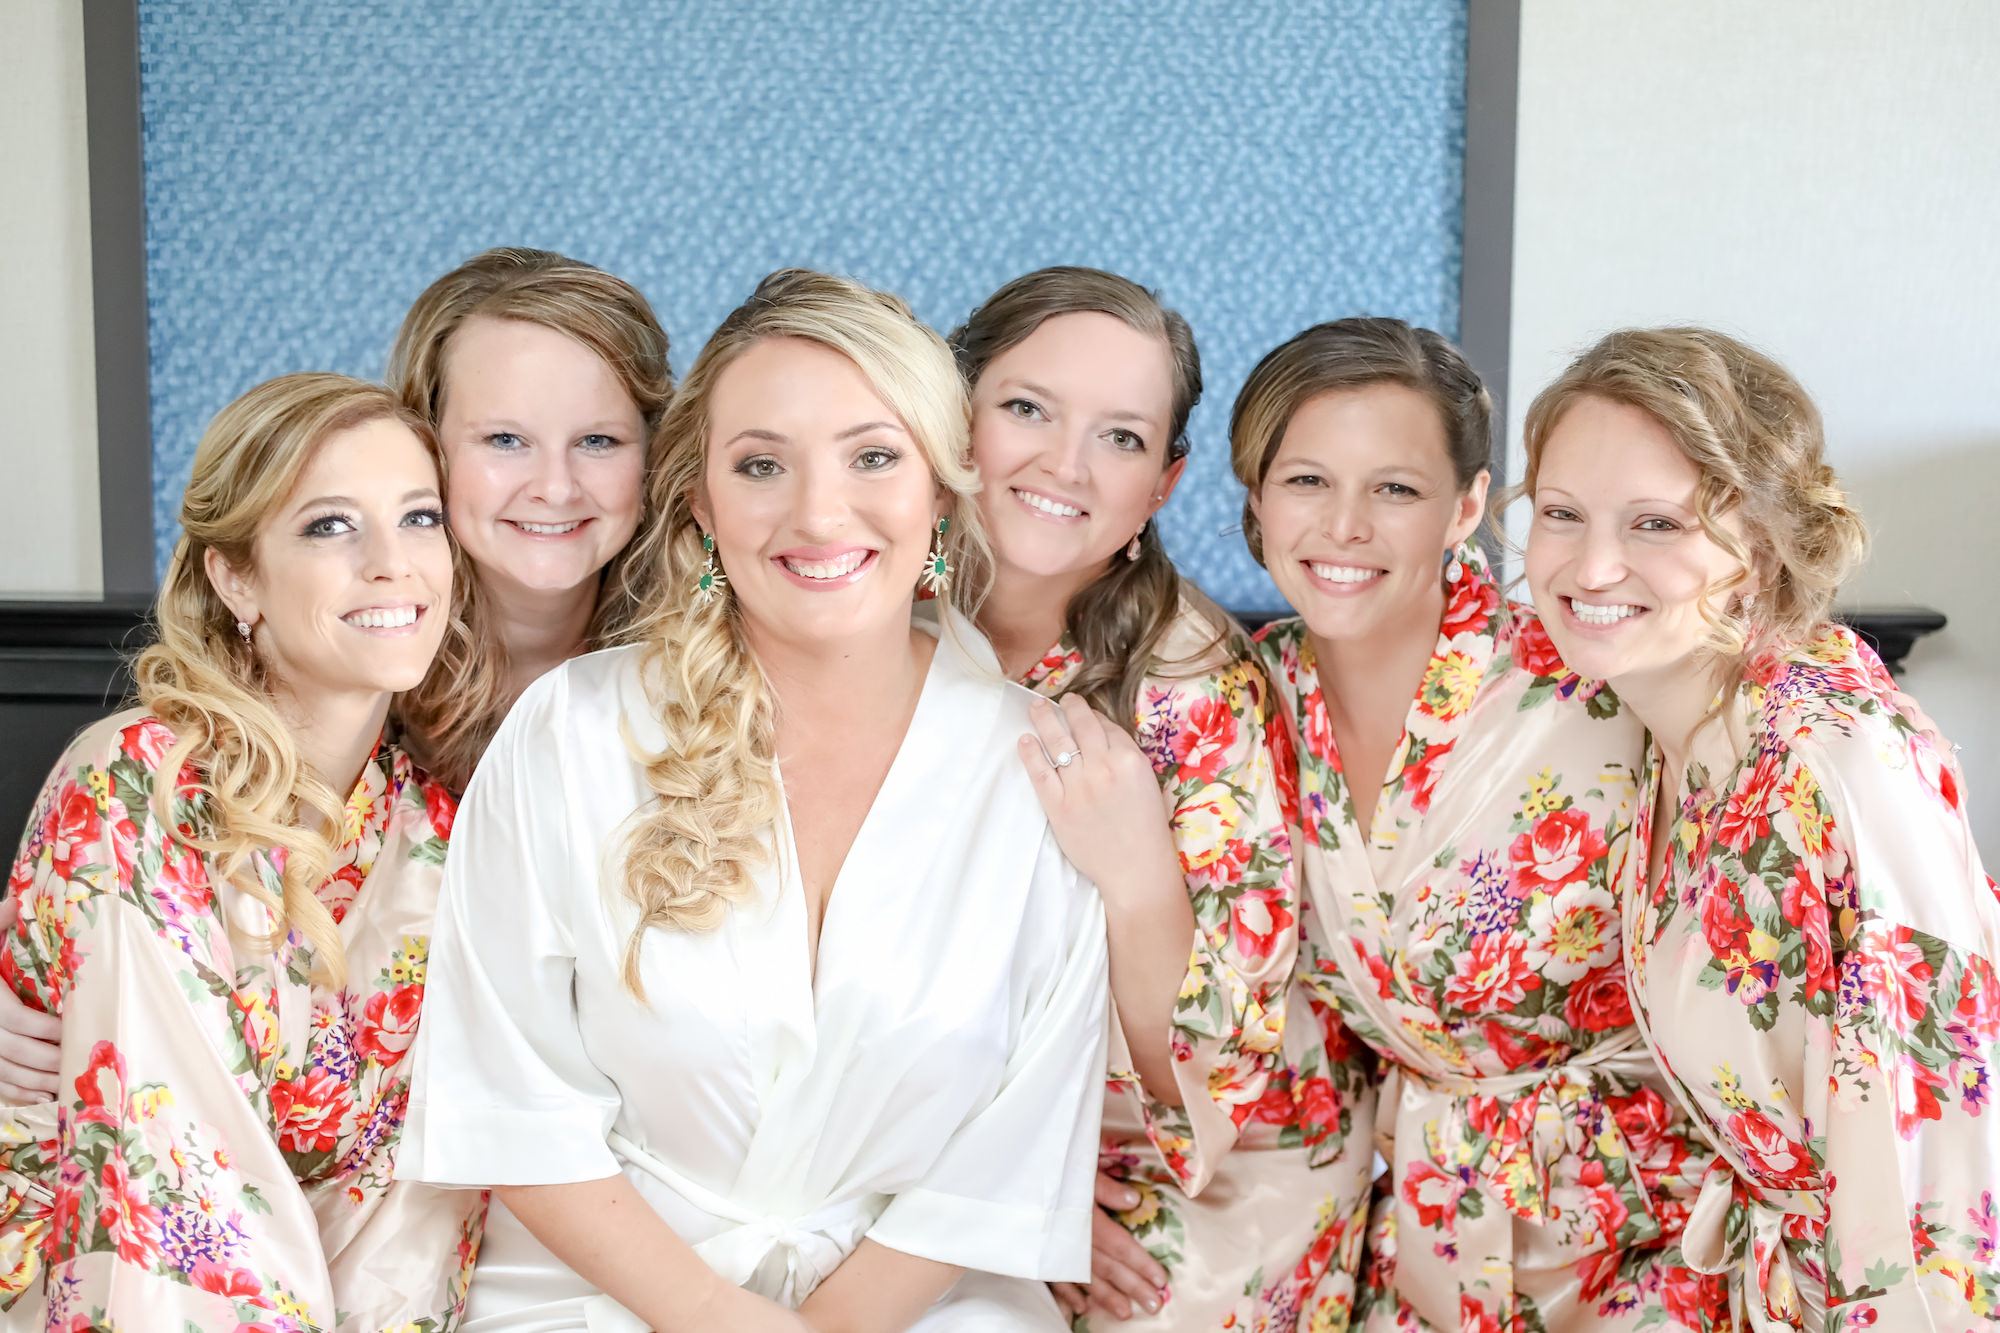 St. Pete Bride and Bridesmaid Getting Ready Photo, Champagne Gold Silk Robes with Red Floral Design, Bride Wearing Emerald Earrings | Florida Wedding Photographer Lifelong Photography Studios